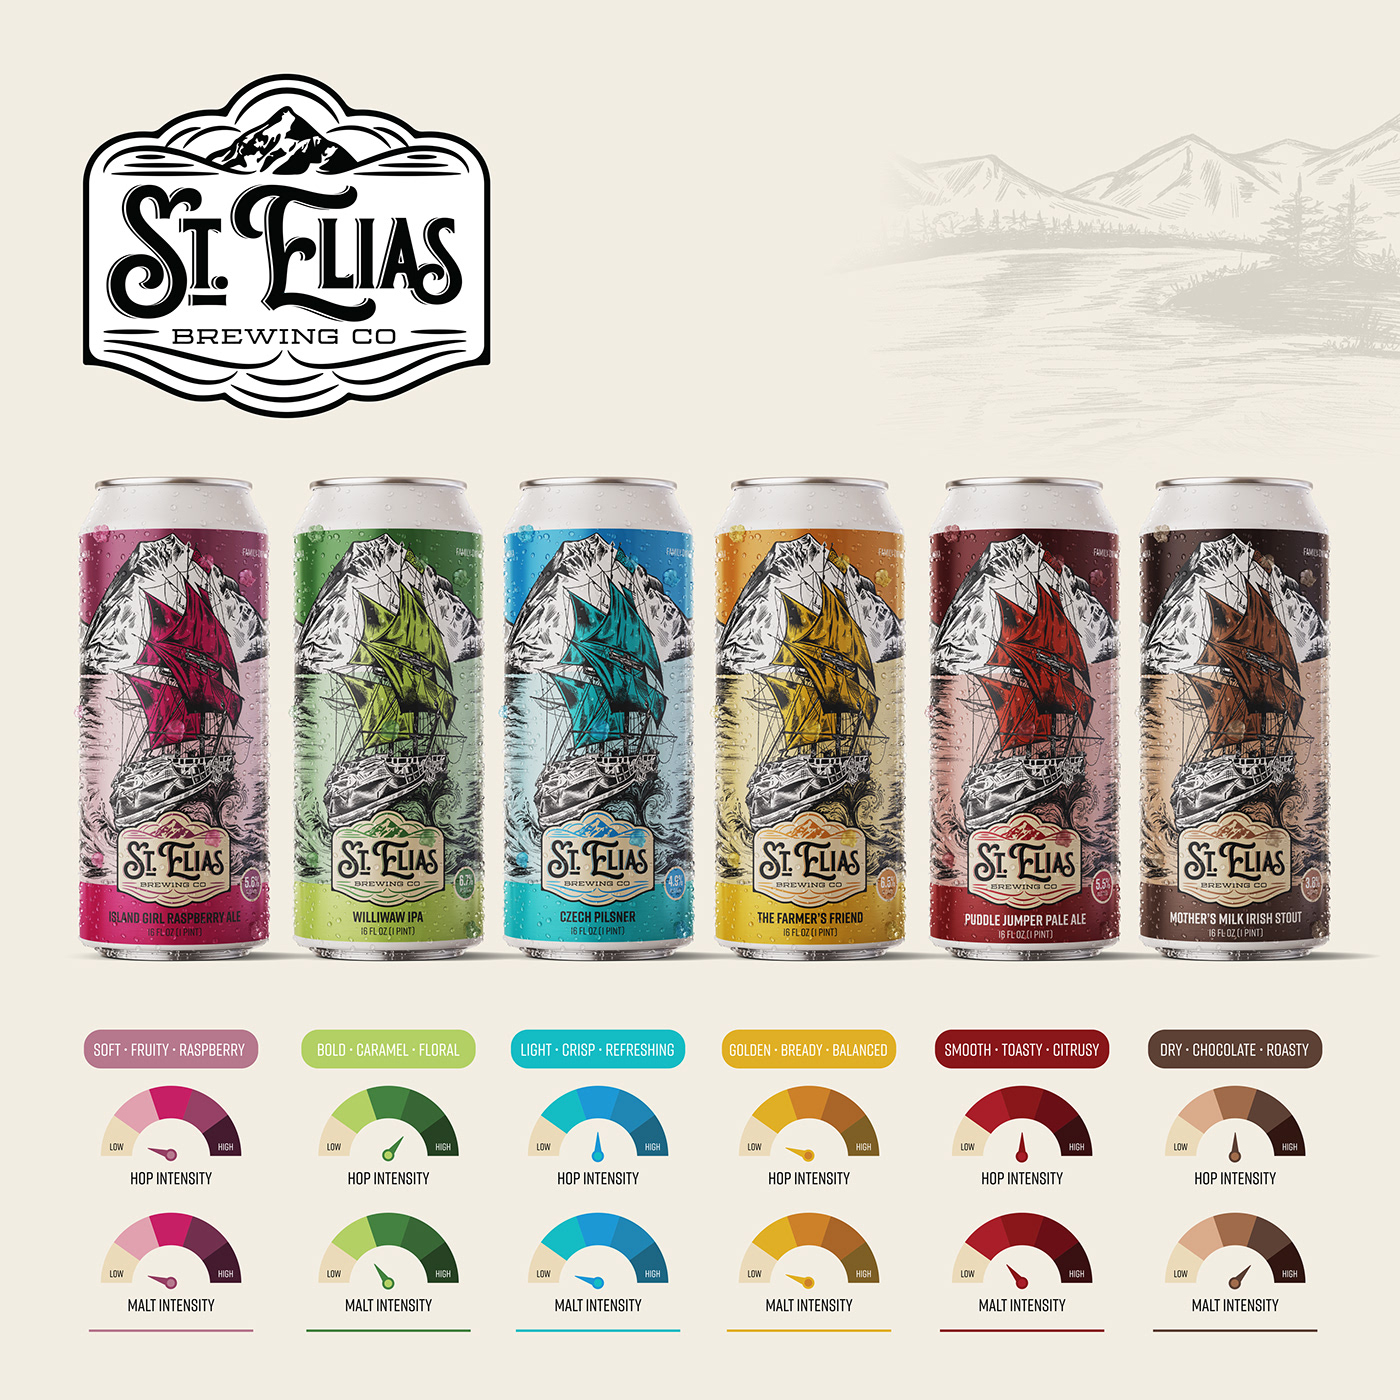 Craft beer branding and logo design for St. Elias Brewing Company located in Alaska. 